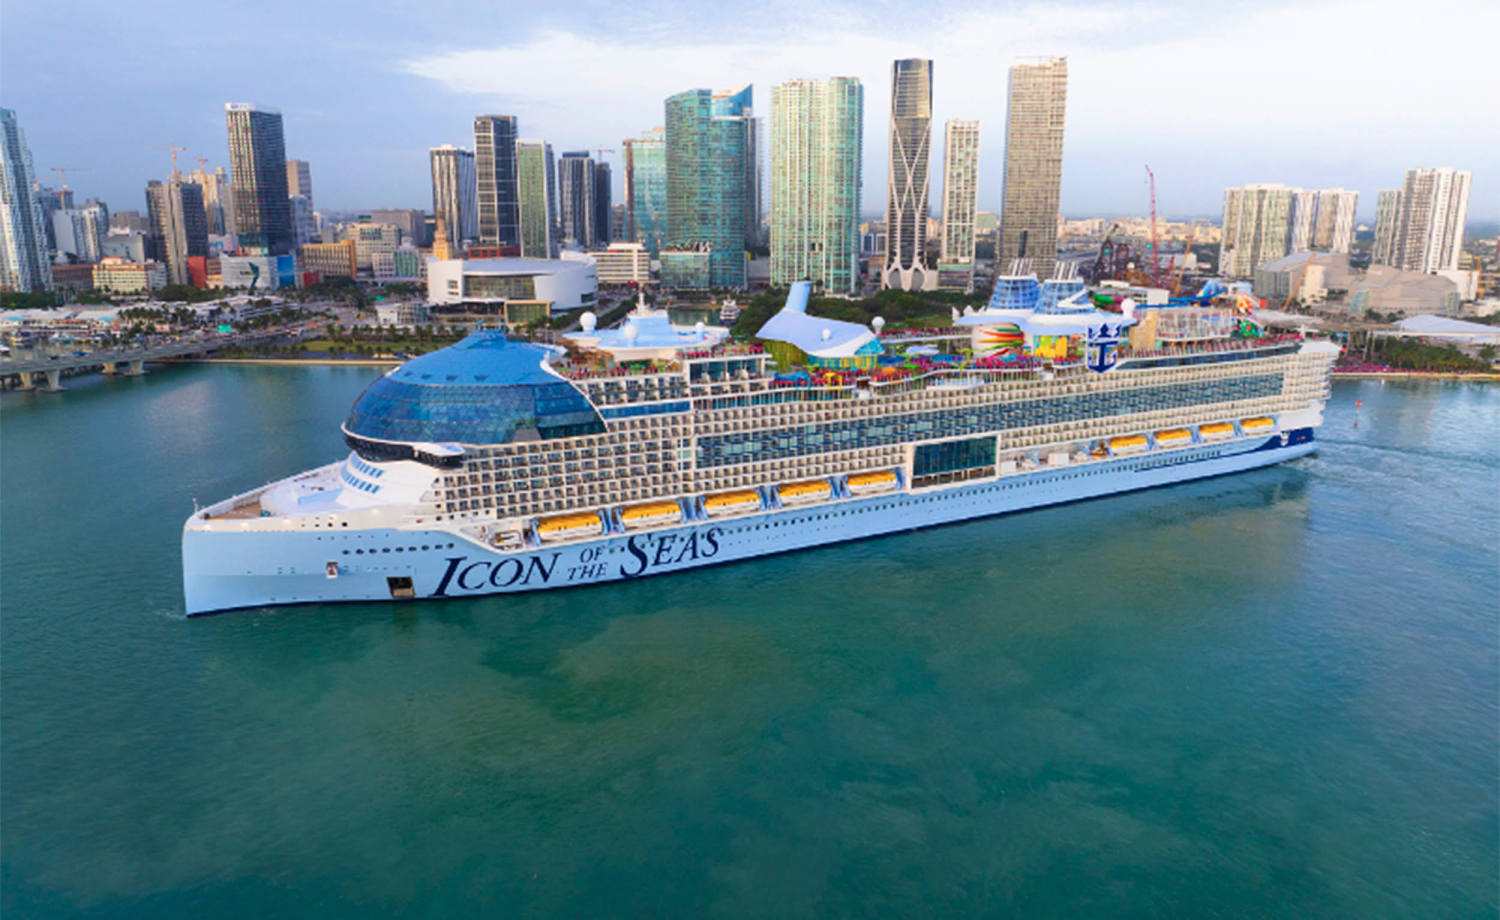 icon of the seas: everything you need to know about the largest cruise ship in the world